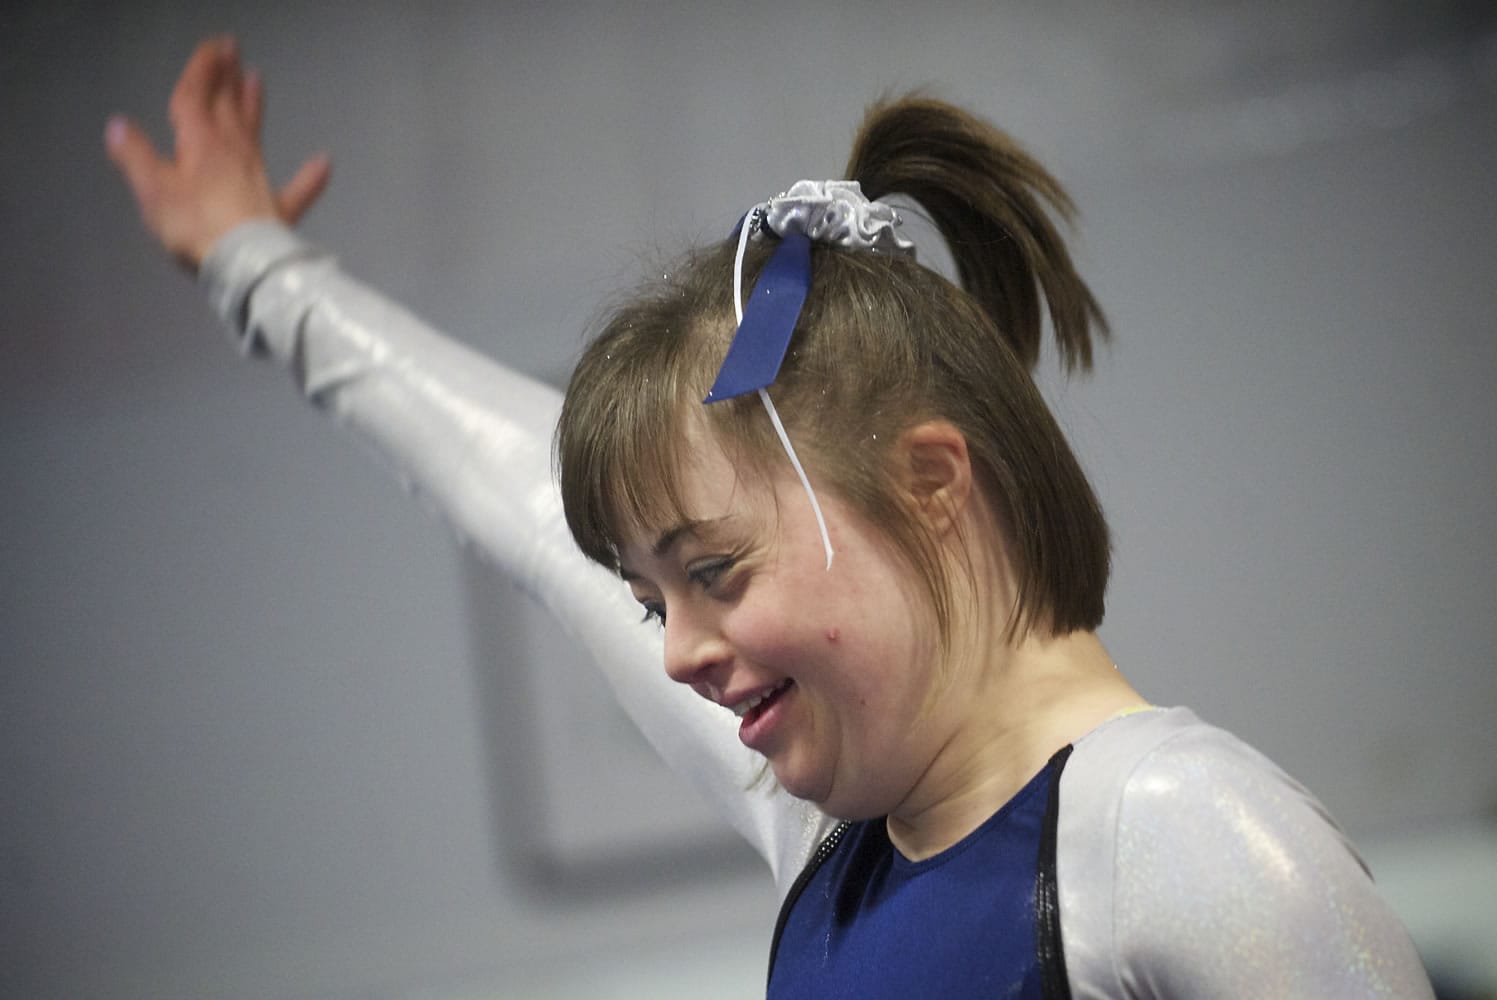 Geneva &quot;Gigi&quot; Gernhart, 24, focuses on her balance beam routine Sunday as her Special Abilities team competes in an open meet with five local clubs at Naydenov Gymnastics.